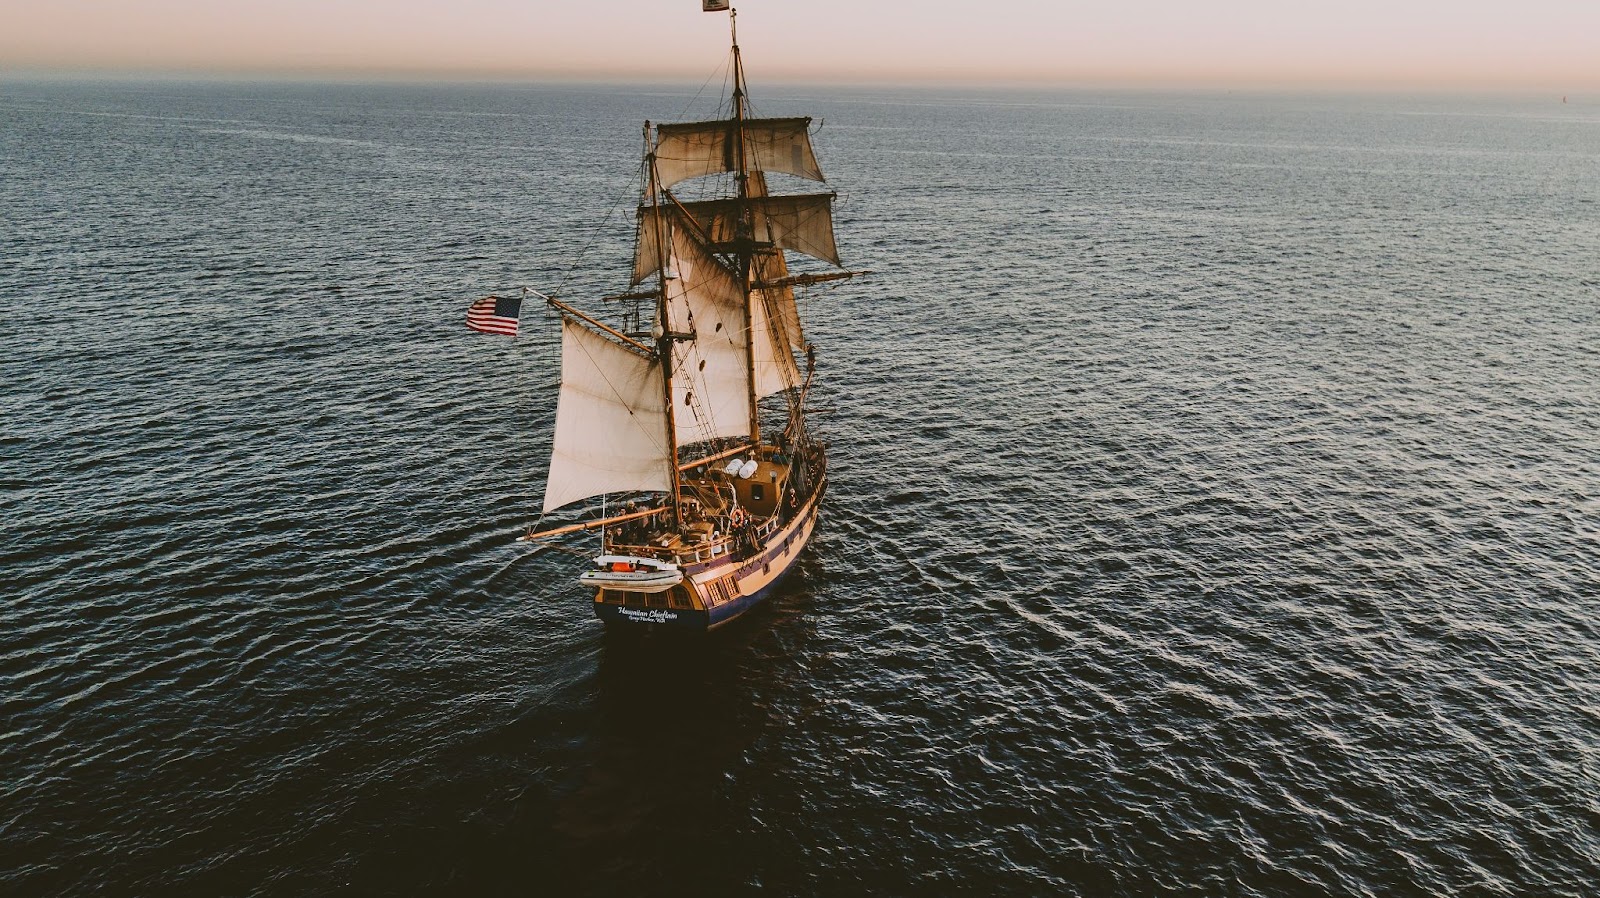 Old ship sailing on the ocean